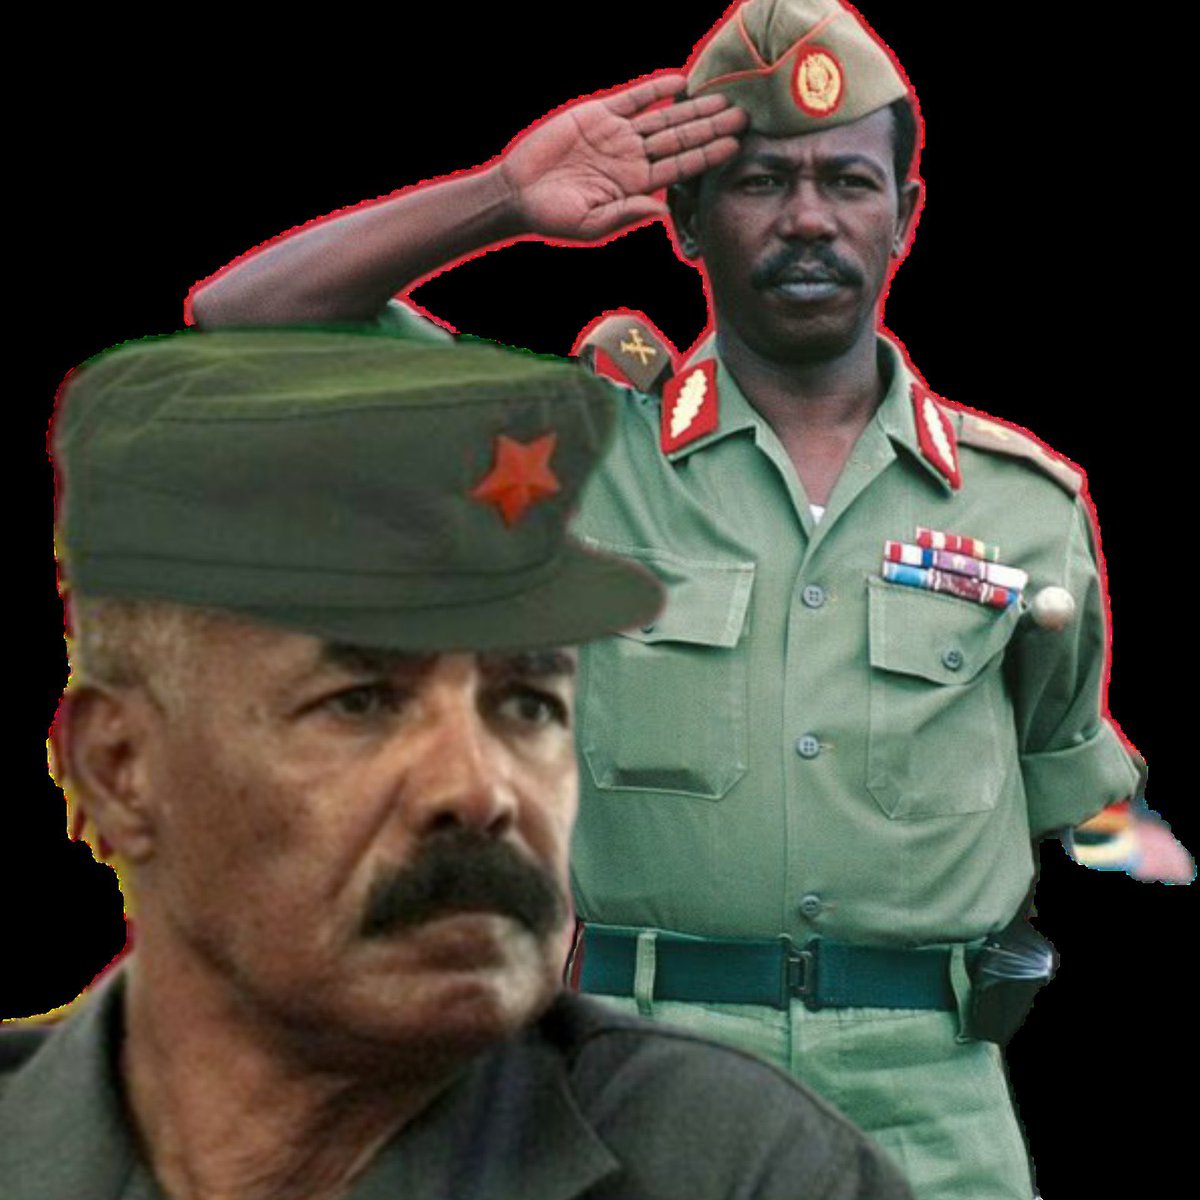 On this day 1991 #Eritrea shifted power from the #Ethipean Derg regime to the dictatorial regime. The dictator uses #Eritrea like his own compound. All the power and budgets of the country owned by the dictator and his puppet ministers. In the last 33 years of independence the